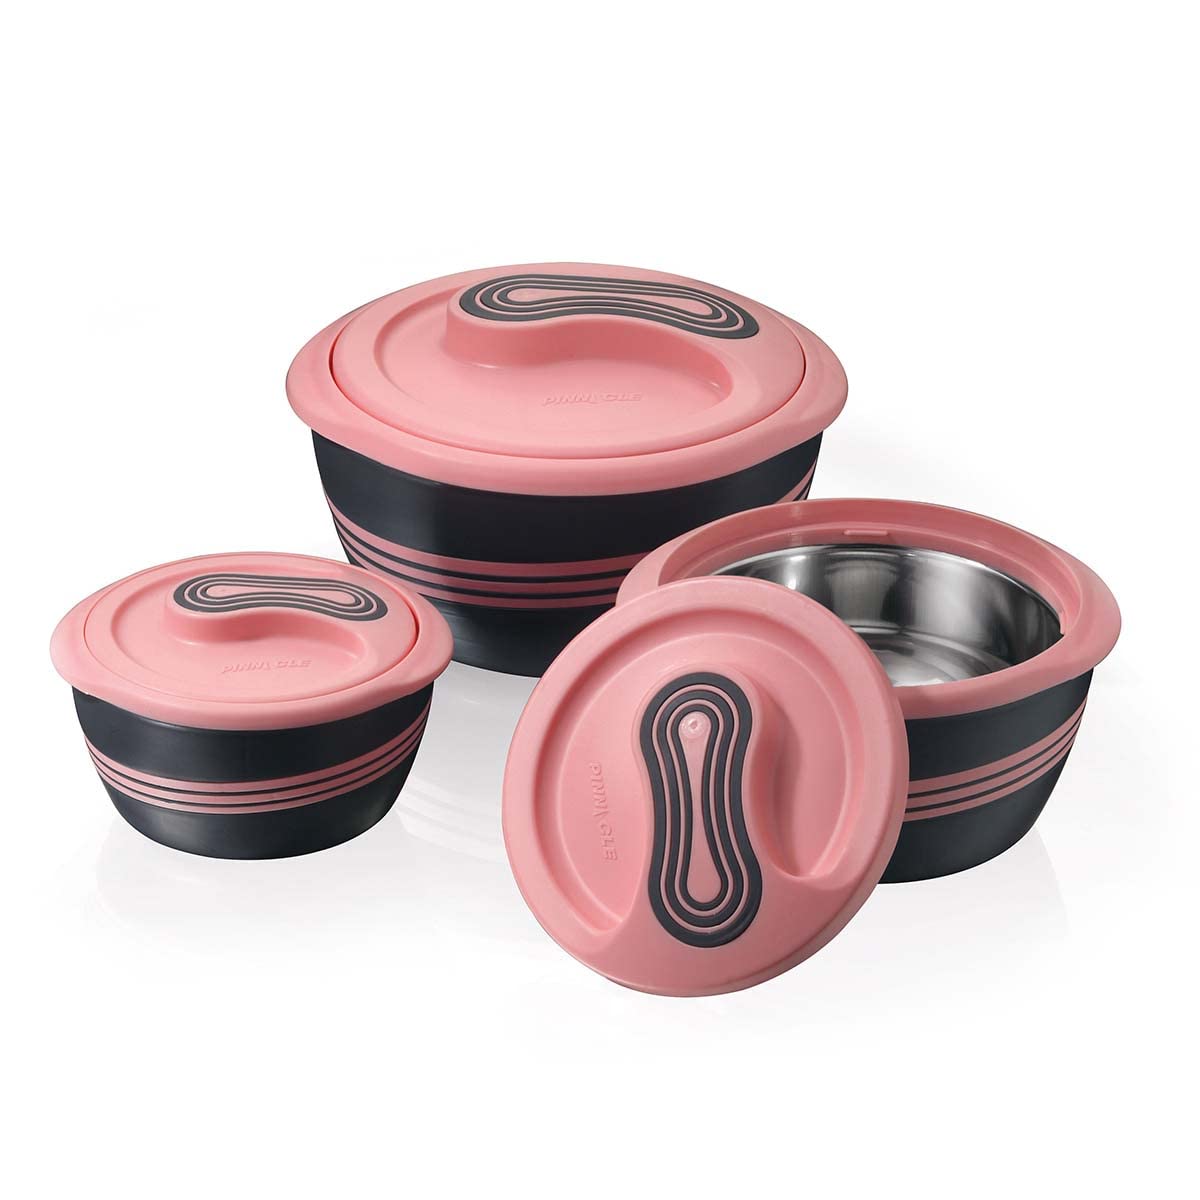 Pinnacle Palazio Inner Stainless Steel Casserole Set of 3 | 500 ml, 1000 ml, 2000 ml | Hot Box | Roti Box | Ideal as Serving Bowl | Hot Case | Blue (Pink)